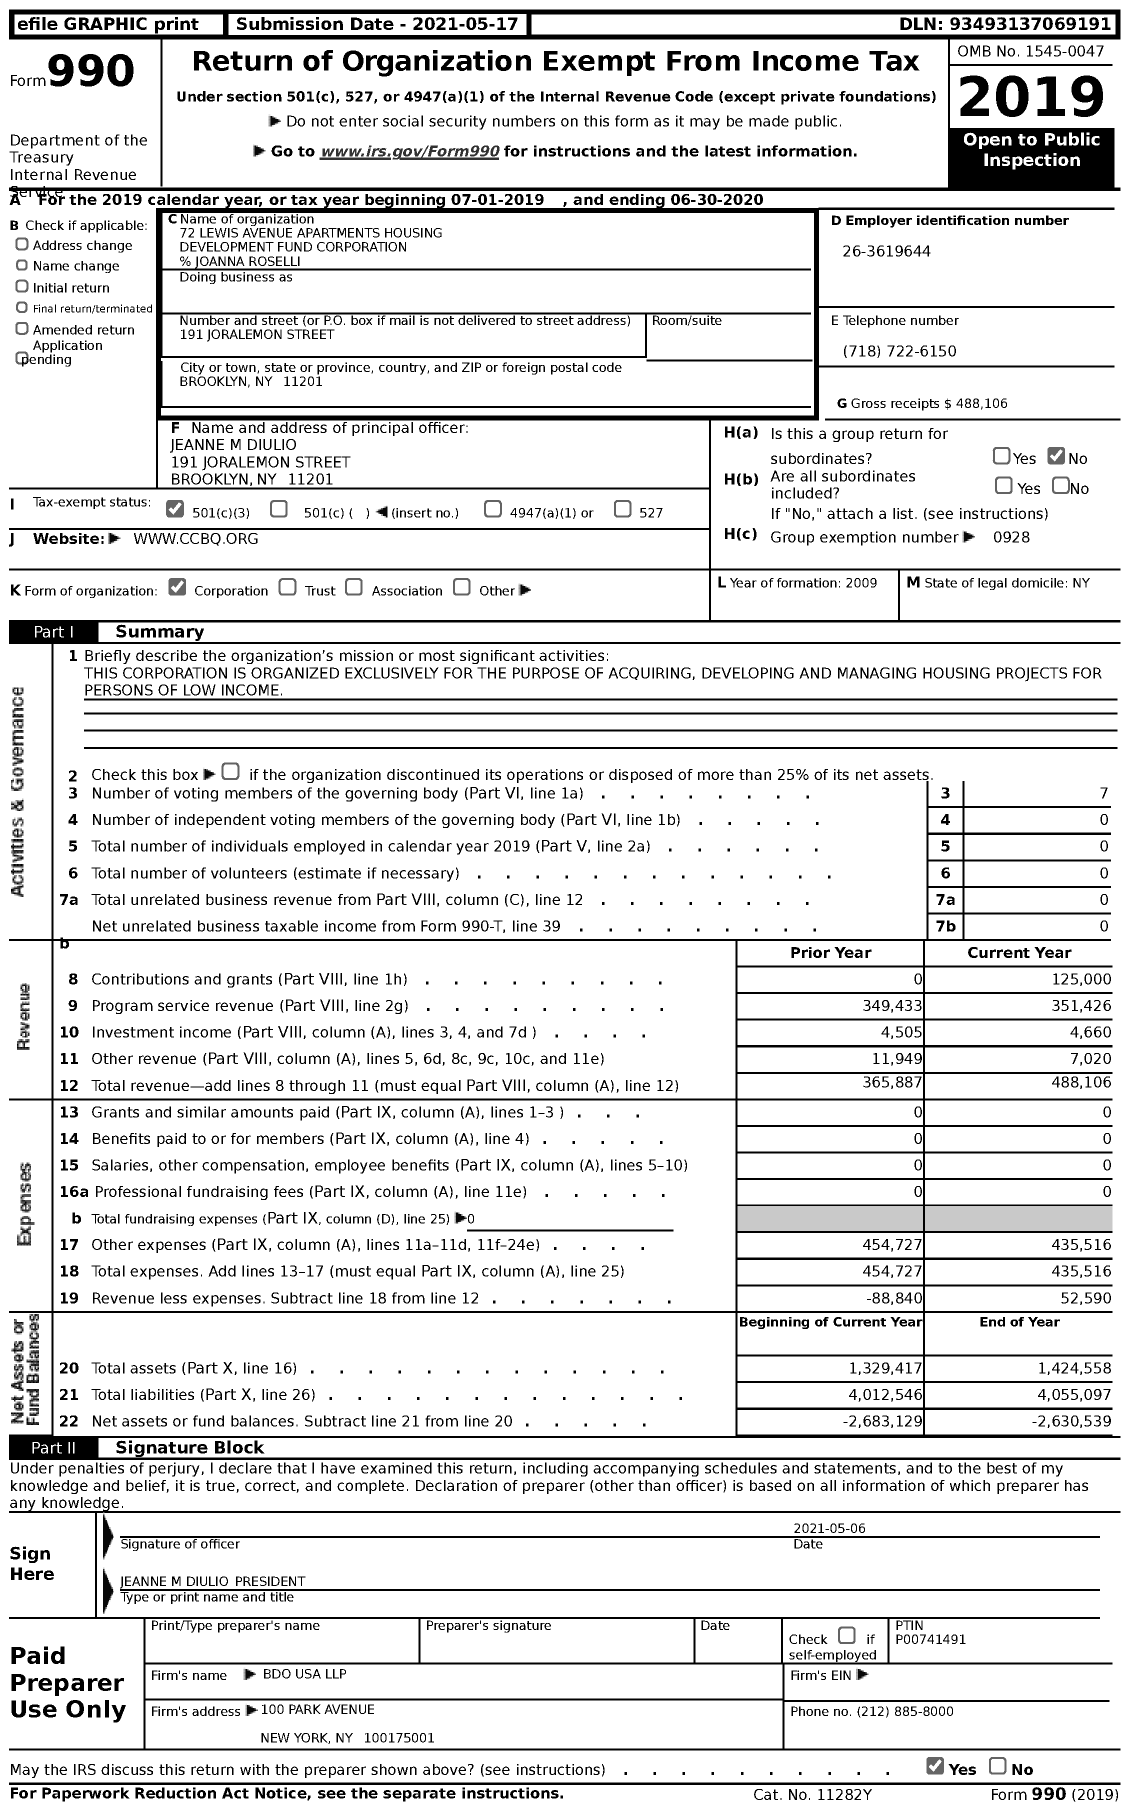 Image of first page of 2019 Form 990 for 72 Lewis Avenue Apartments Housing Development Fund Corporation